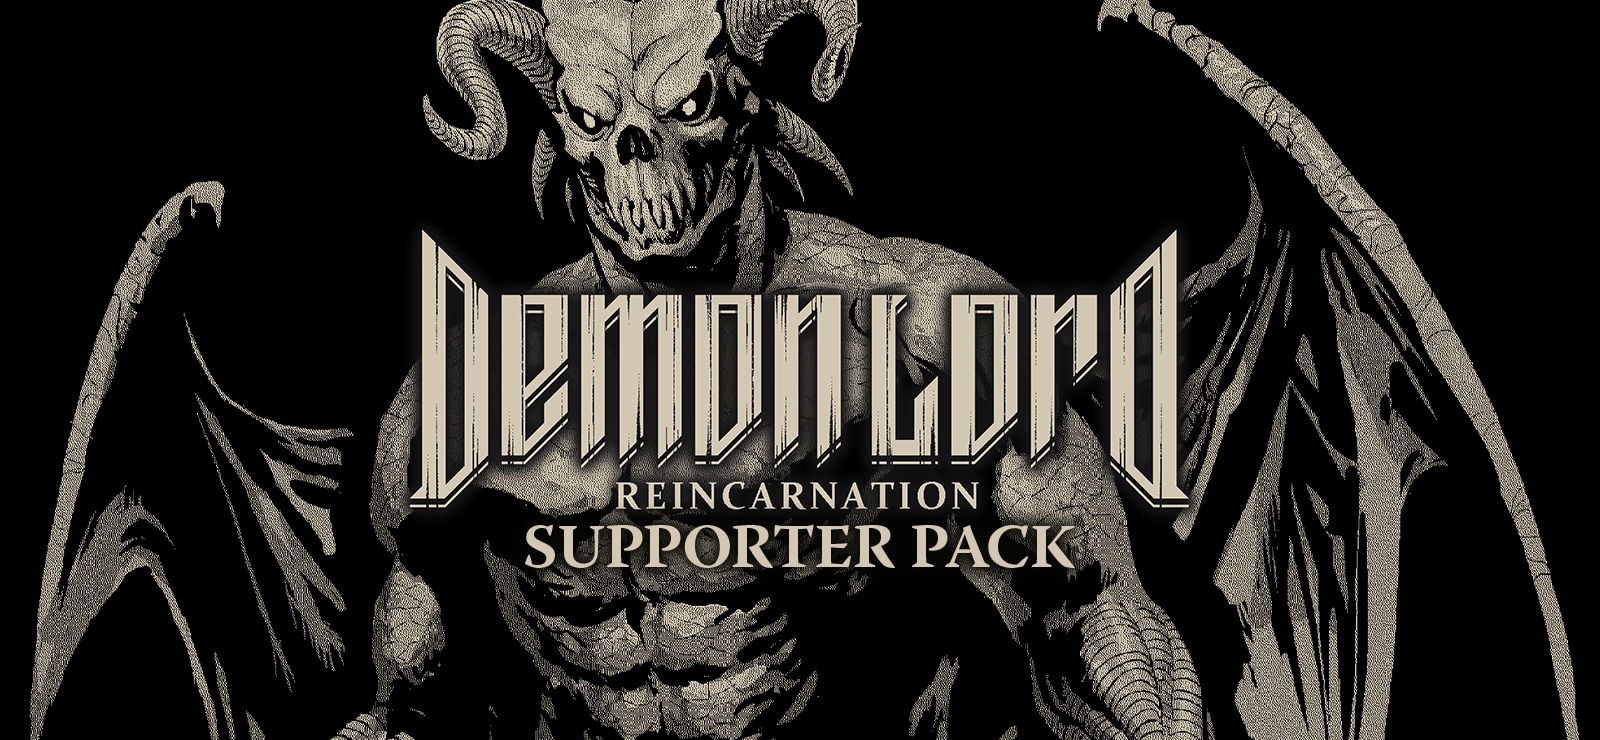 Demon Lord Reincarnation: Supporter Pack